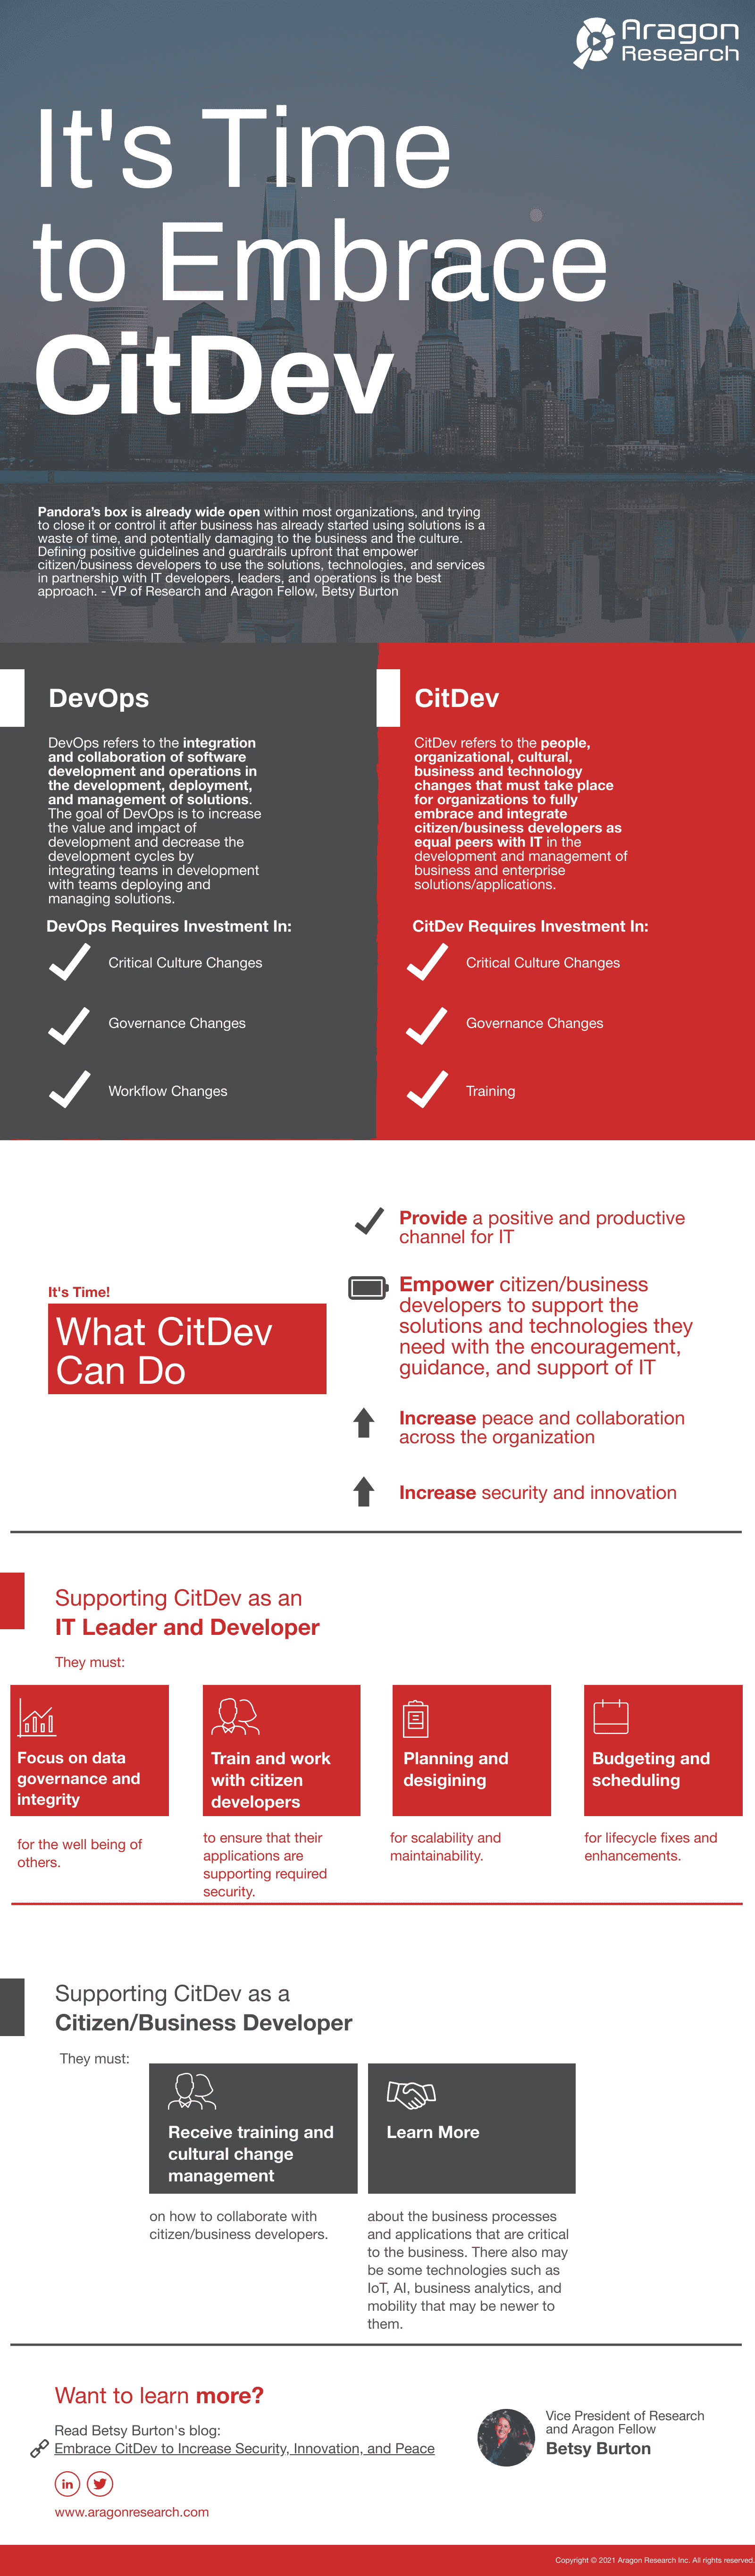 CitDev Infographic 2 - [Infographic] It's Time to Embrace CitDev